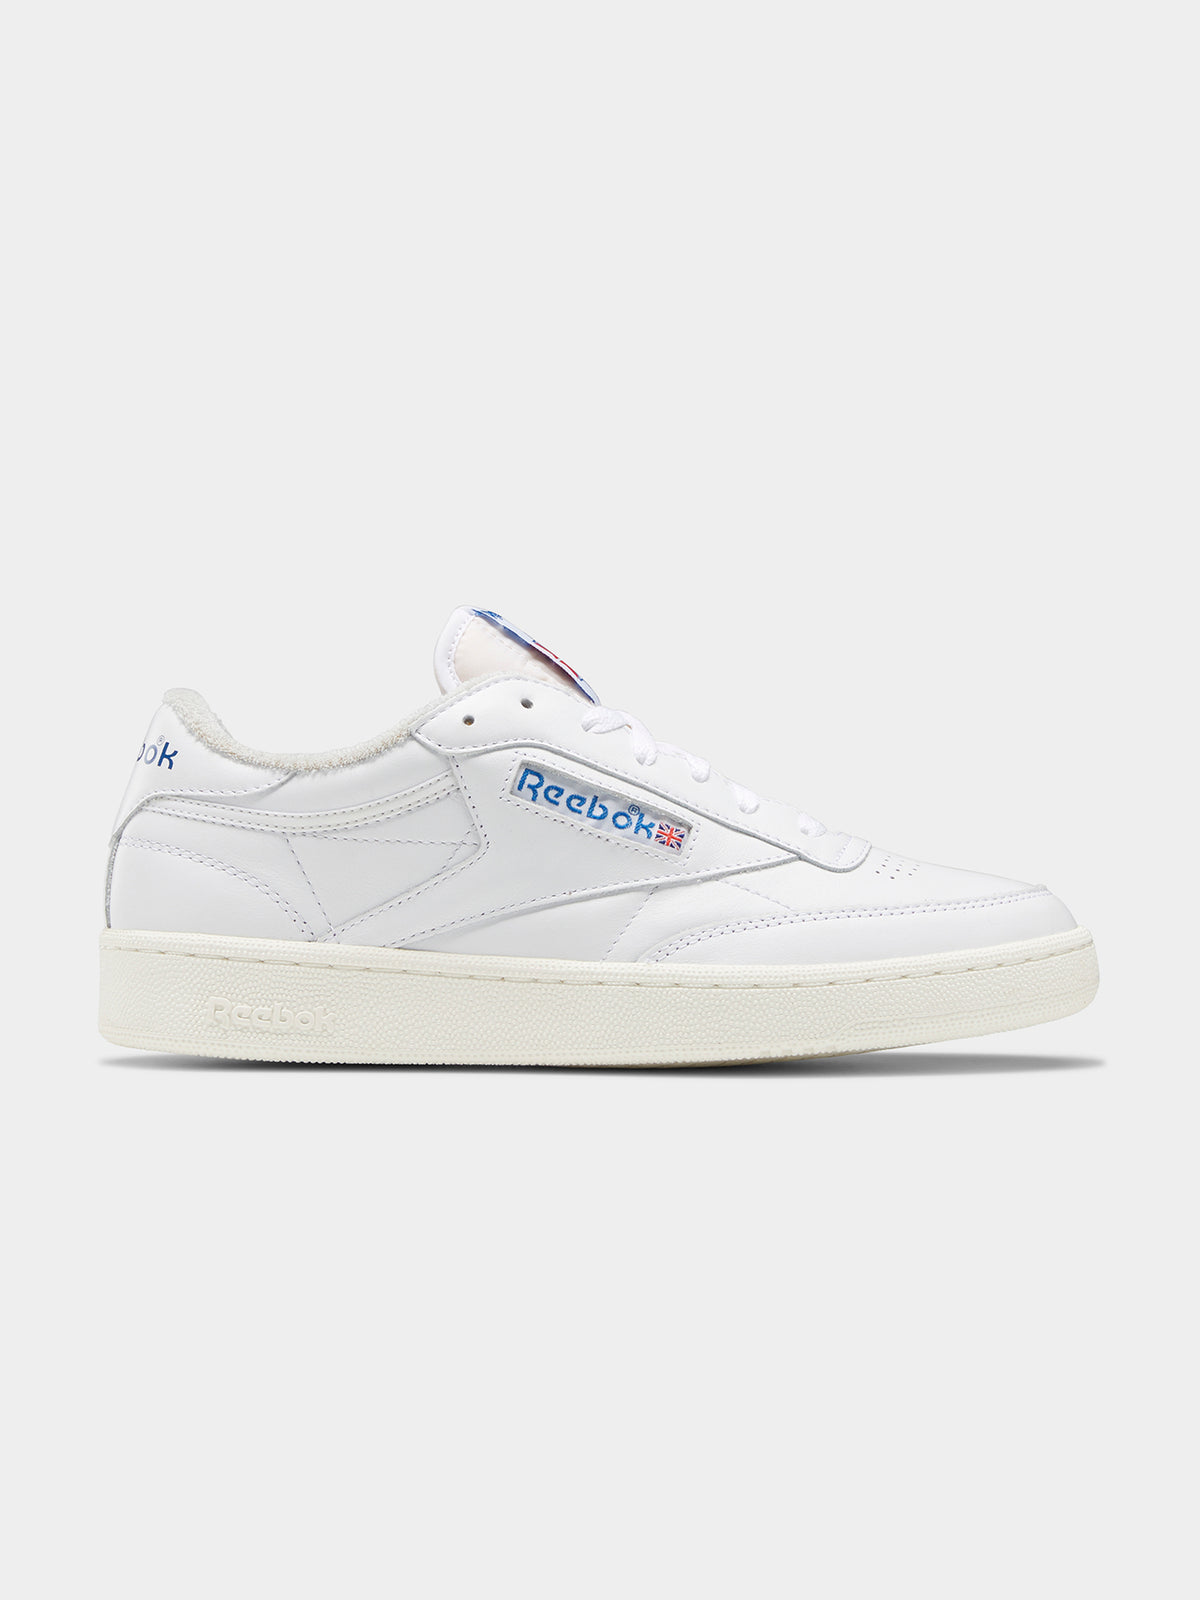 Mens Club C 85 Sneakers in White, Chalk &amp; Vector Blue